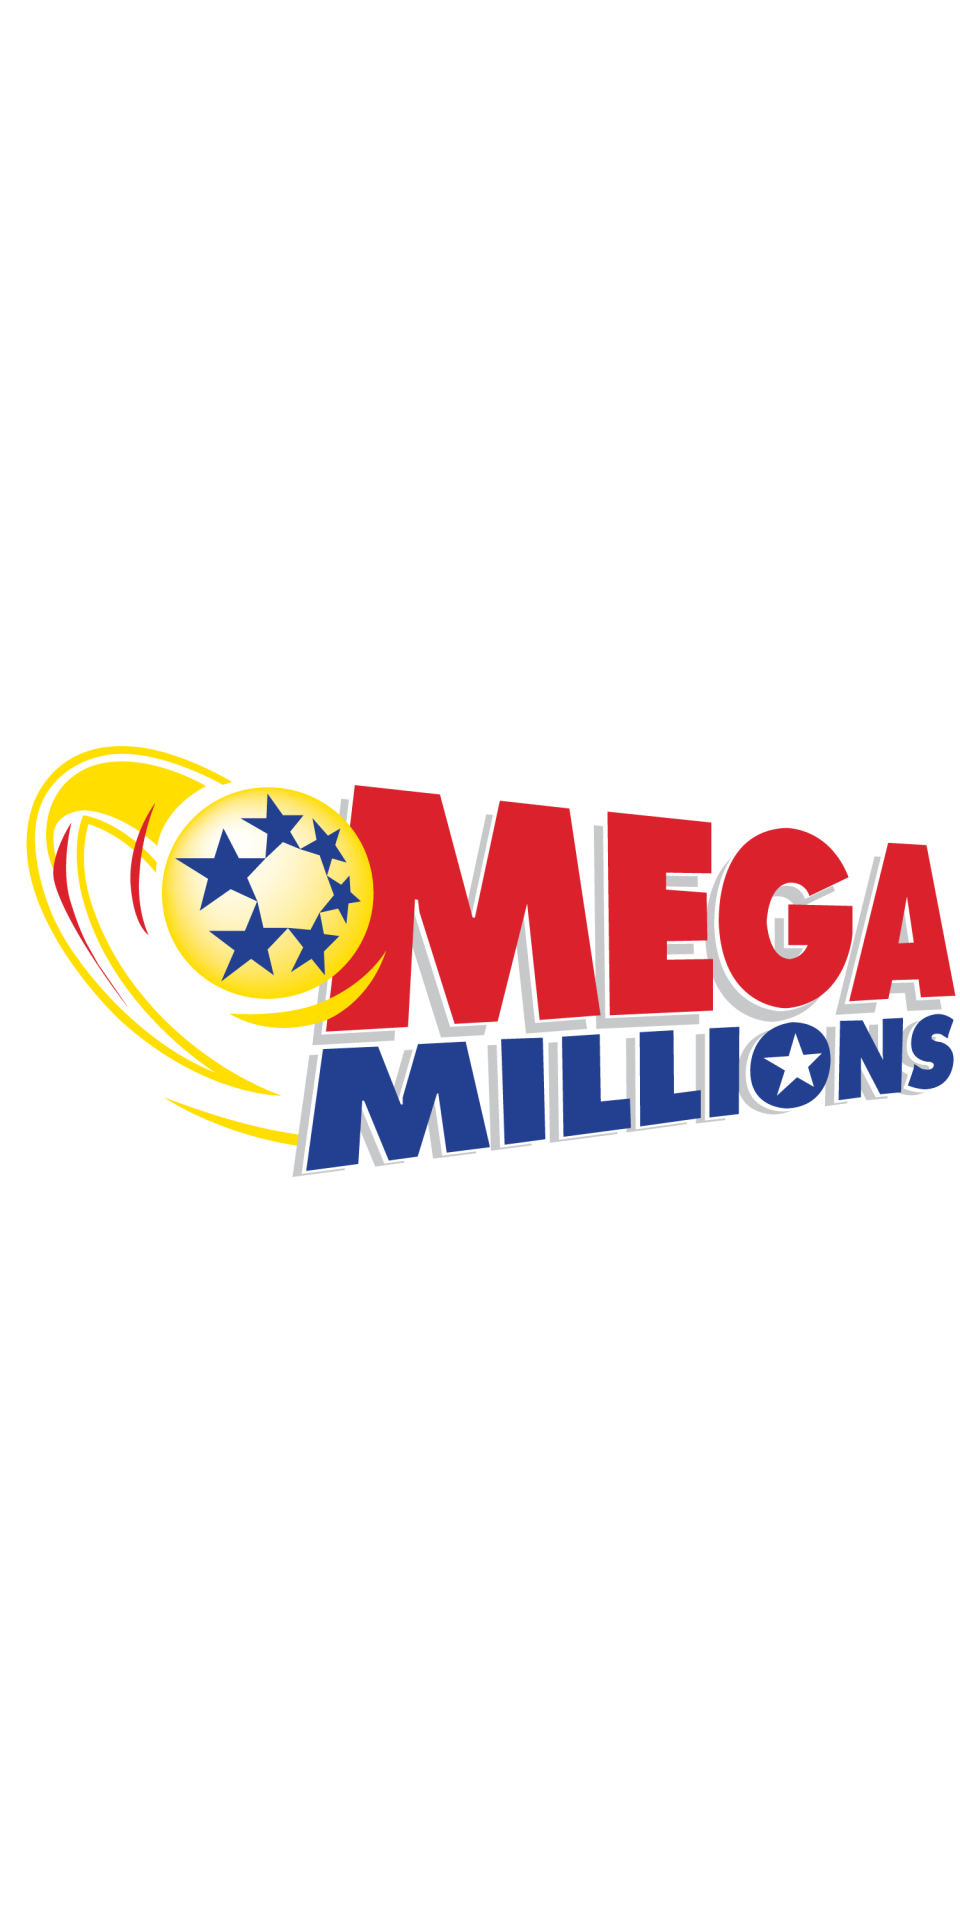 Delawareans have won big jackpots playing Mega Millions. Will you be next?